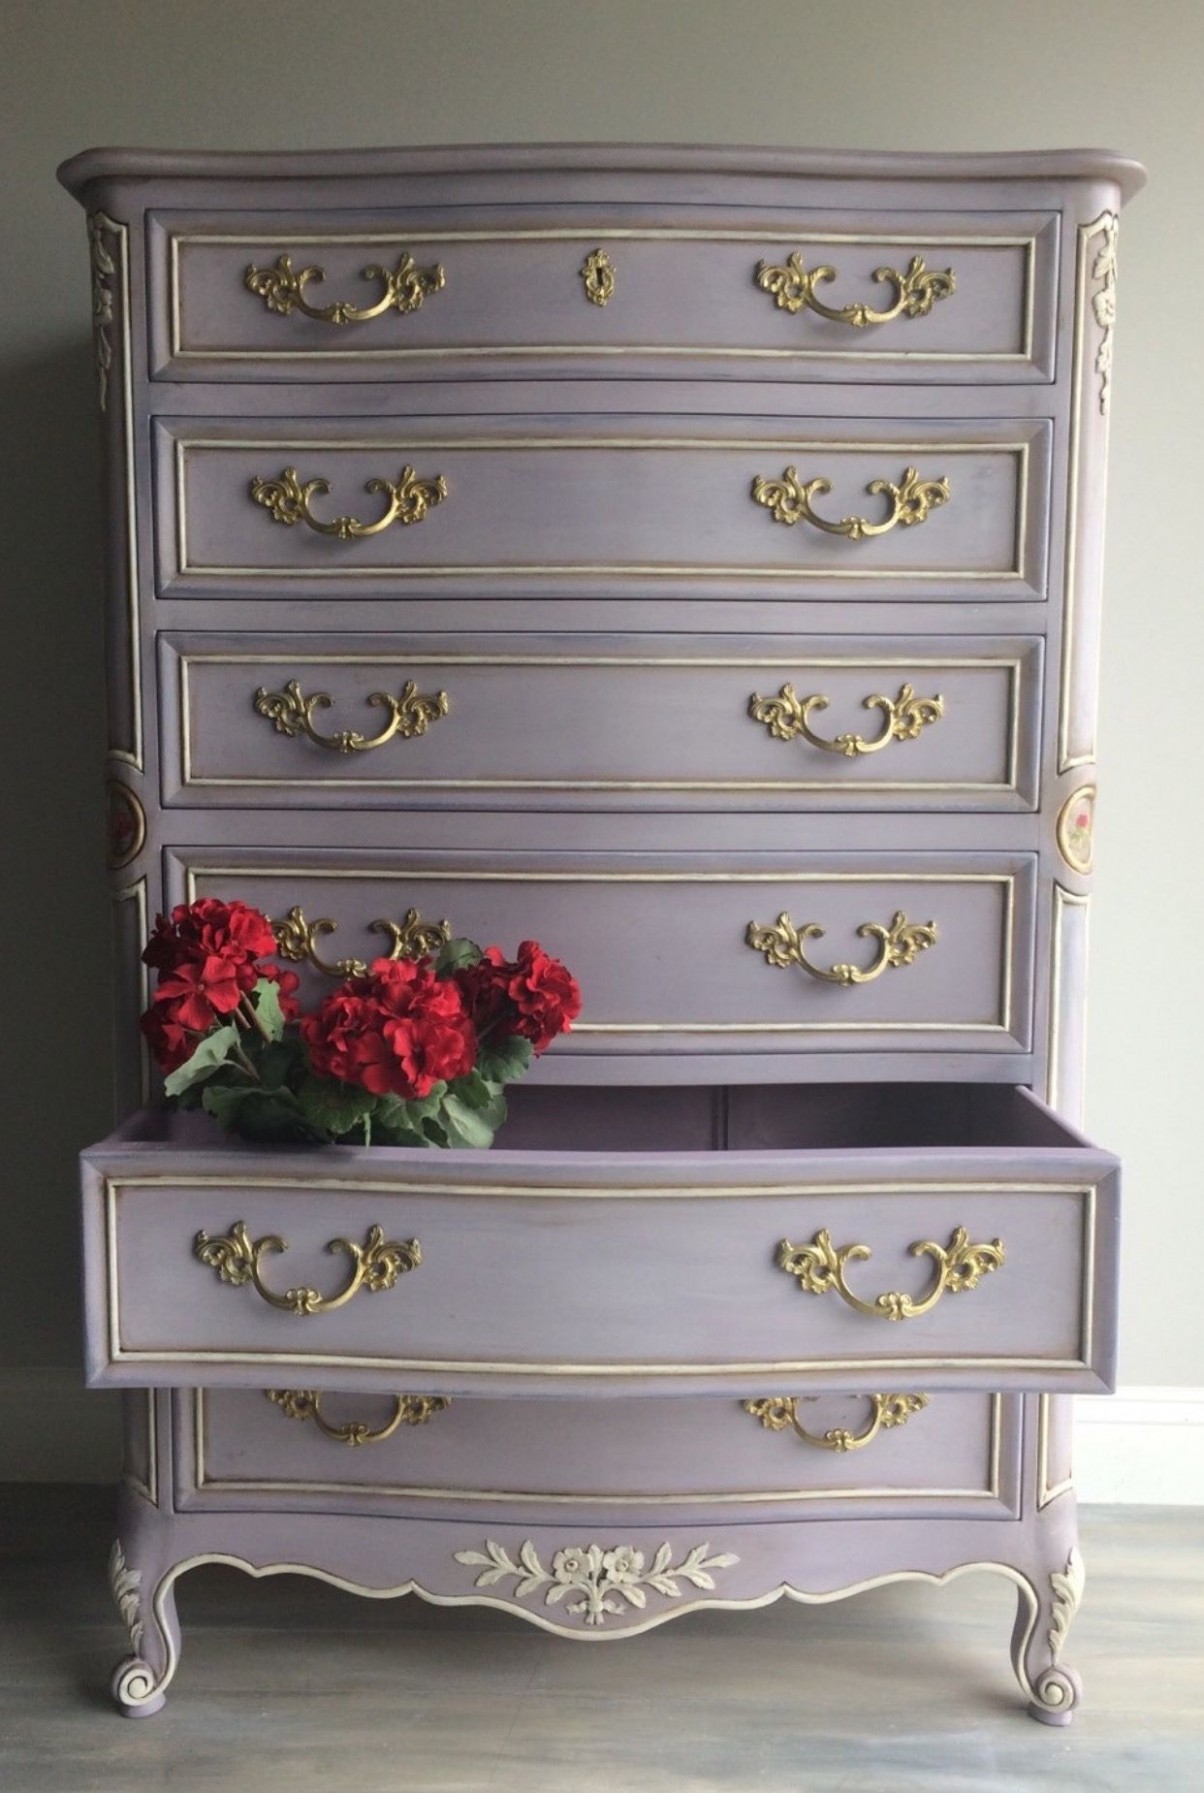 French Provincial Dresser Painted With Annie Sloan Chalk Paint In ..